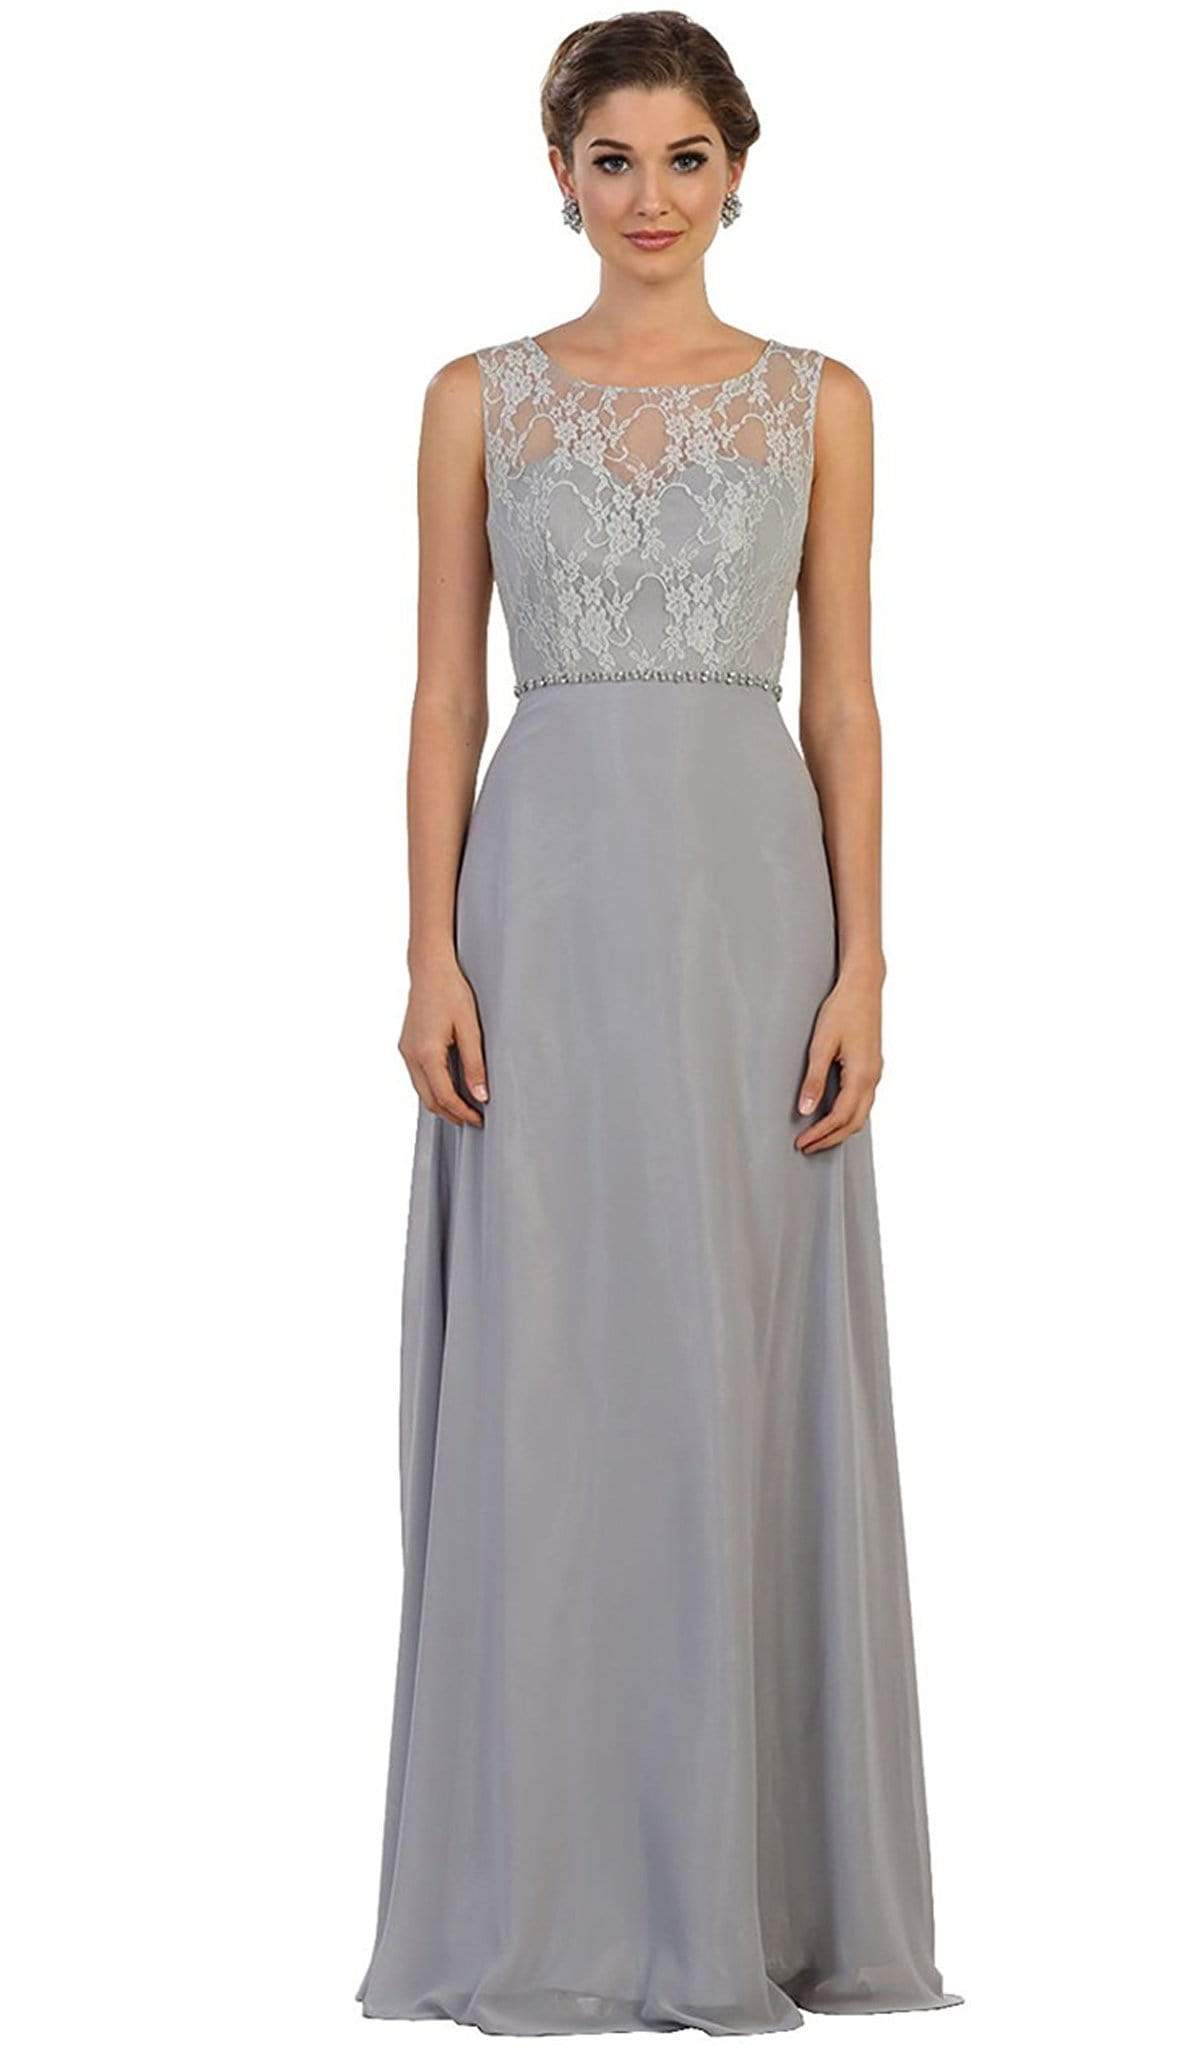 May Queen - Sleeveless Illusion Lace Evening Dress
